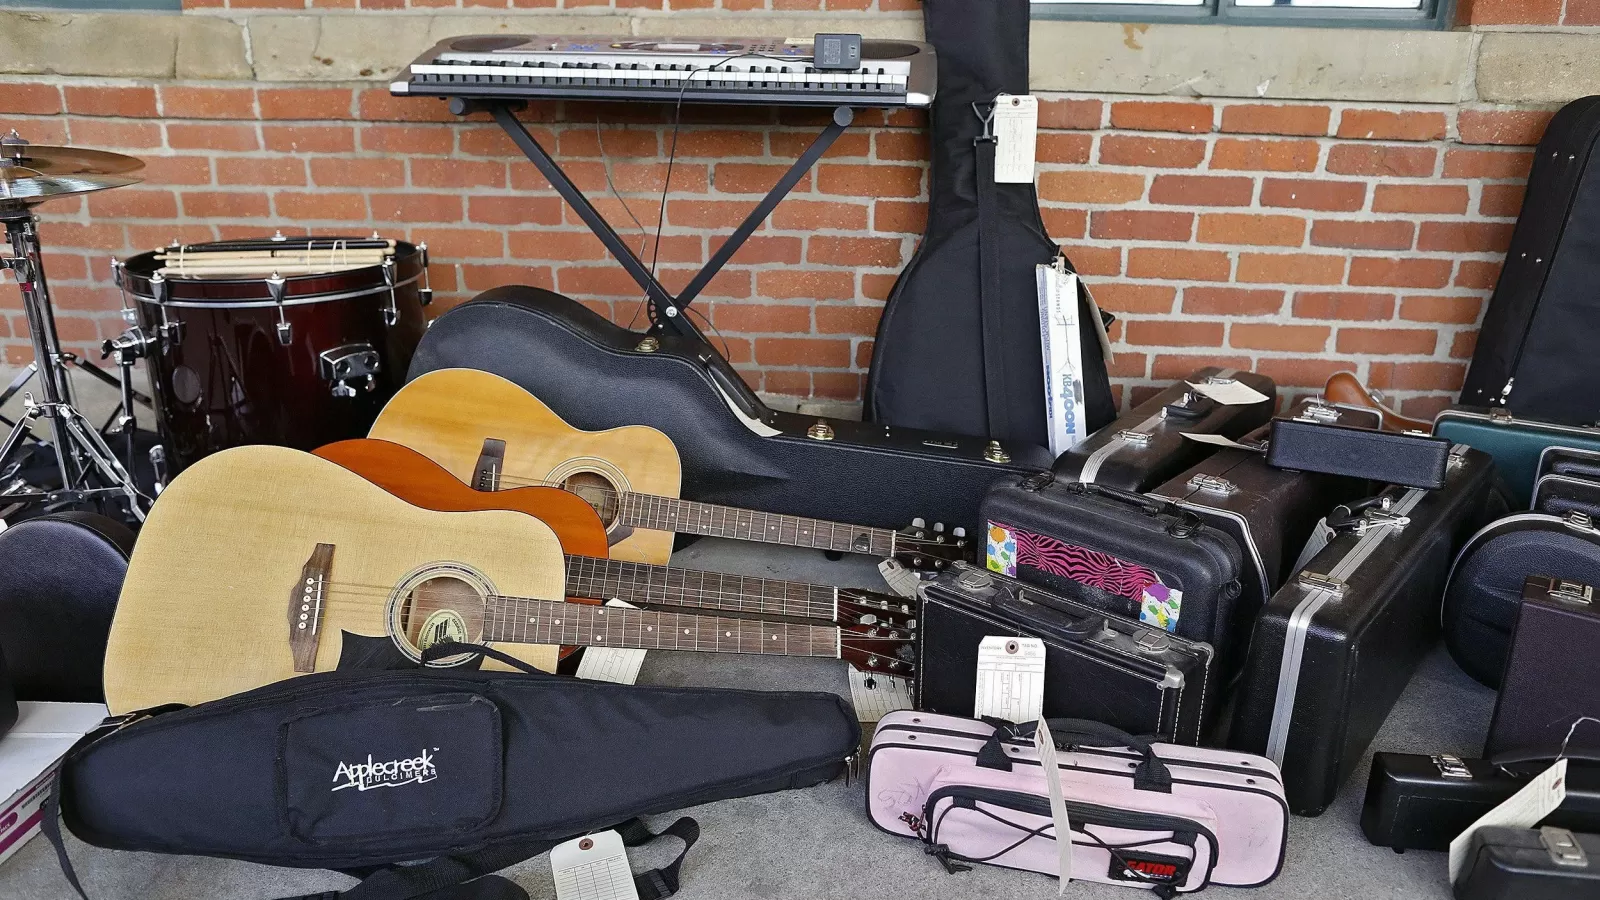 How To Care For Your Musical Instrument